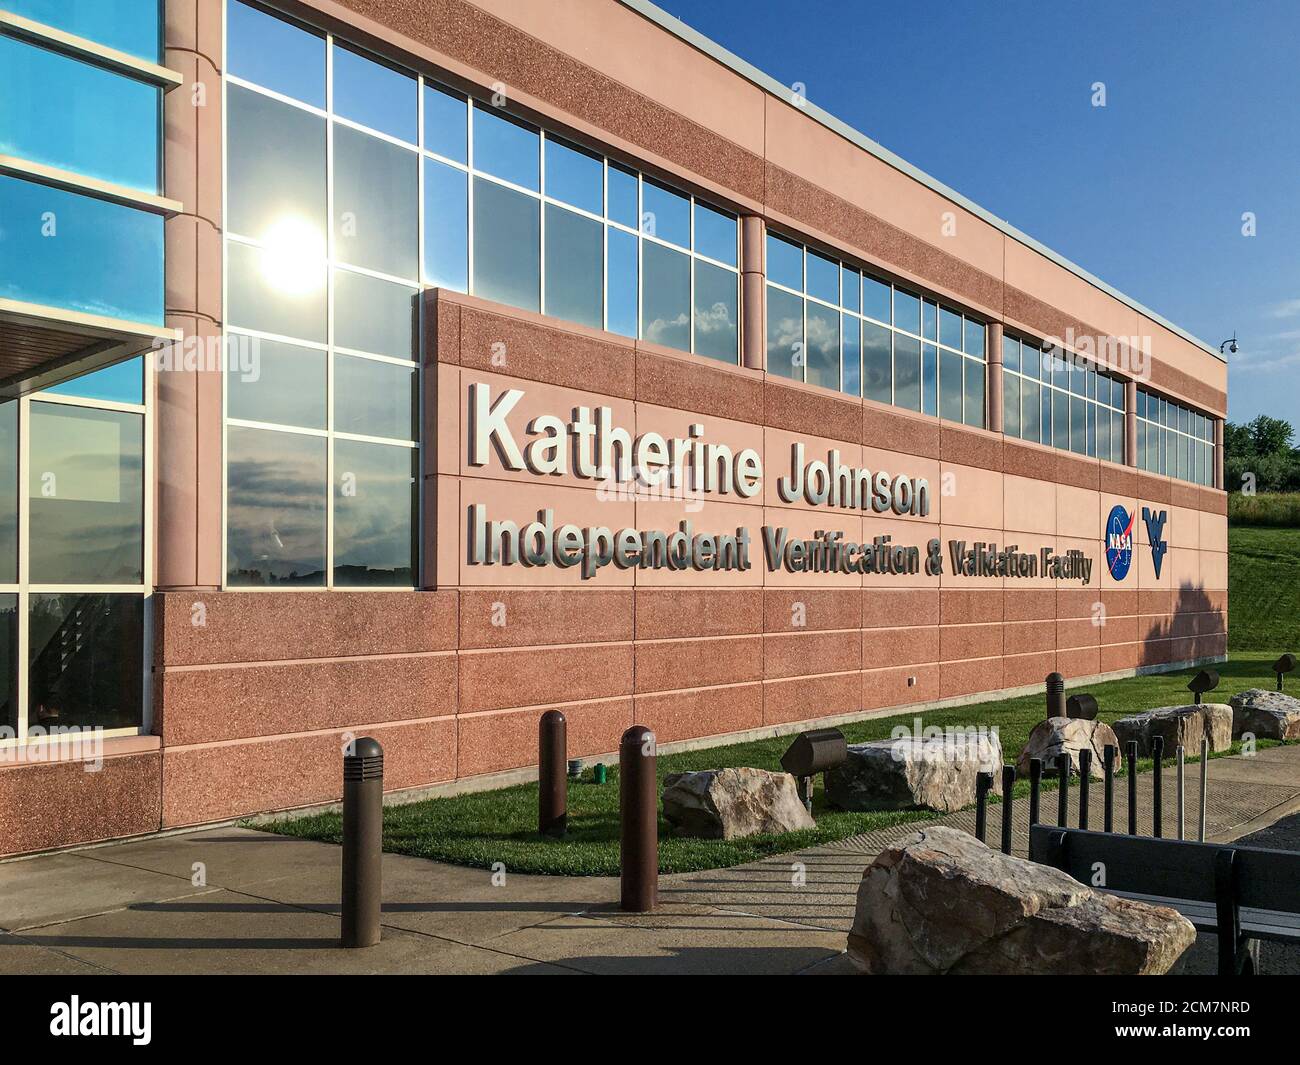 NASA’s Independent Verification & Validation Facility was renamed after agency icon, Katherine Johnson, on July 7, 2019 in Fairmont, West Virginia. Johnson, a “human computer” mathematician, was featured in the film Hidden Figures and helped put the first Americans in space and eventually on the Moon. Stock Photo